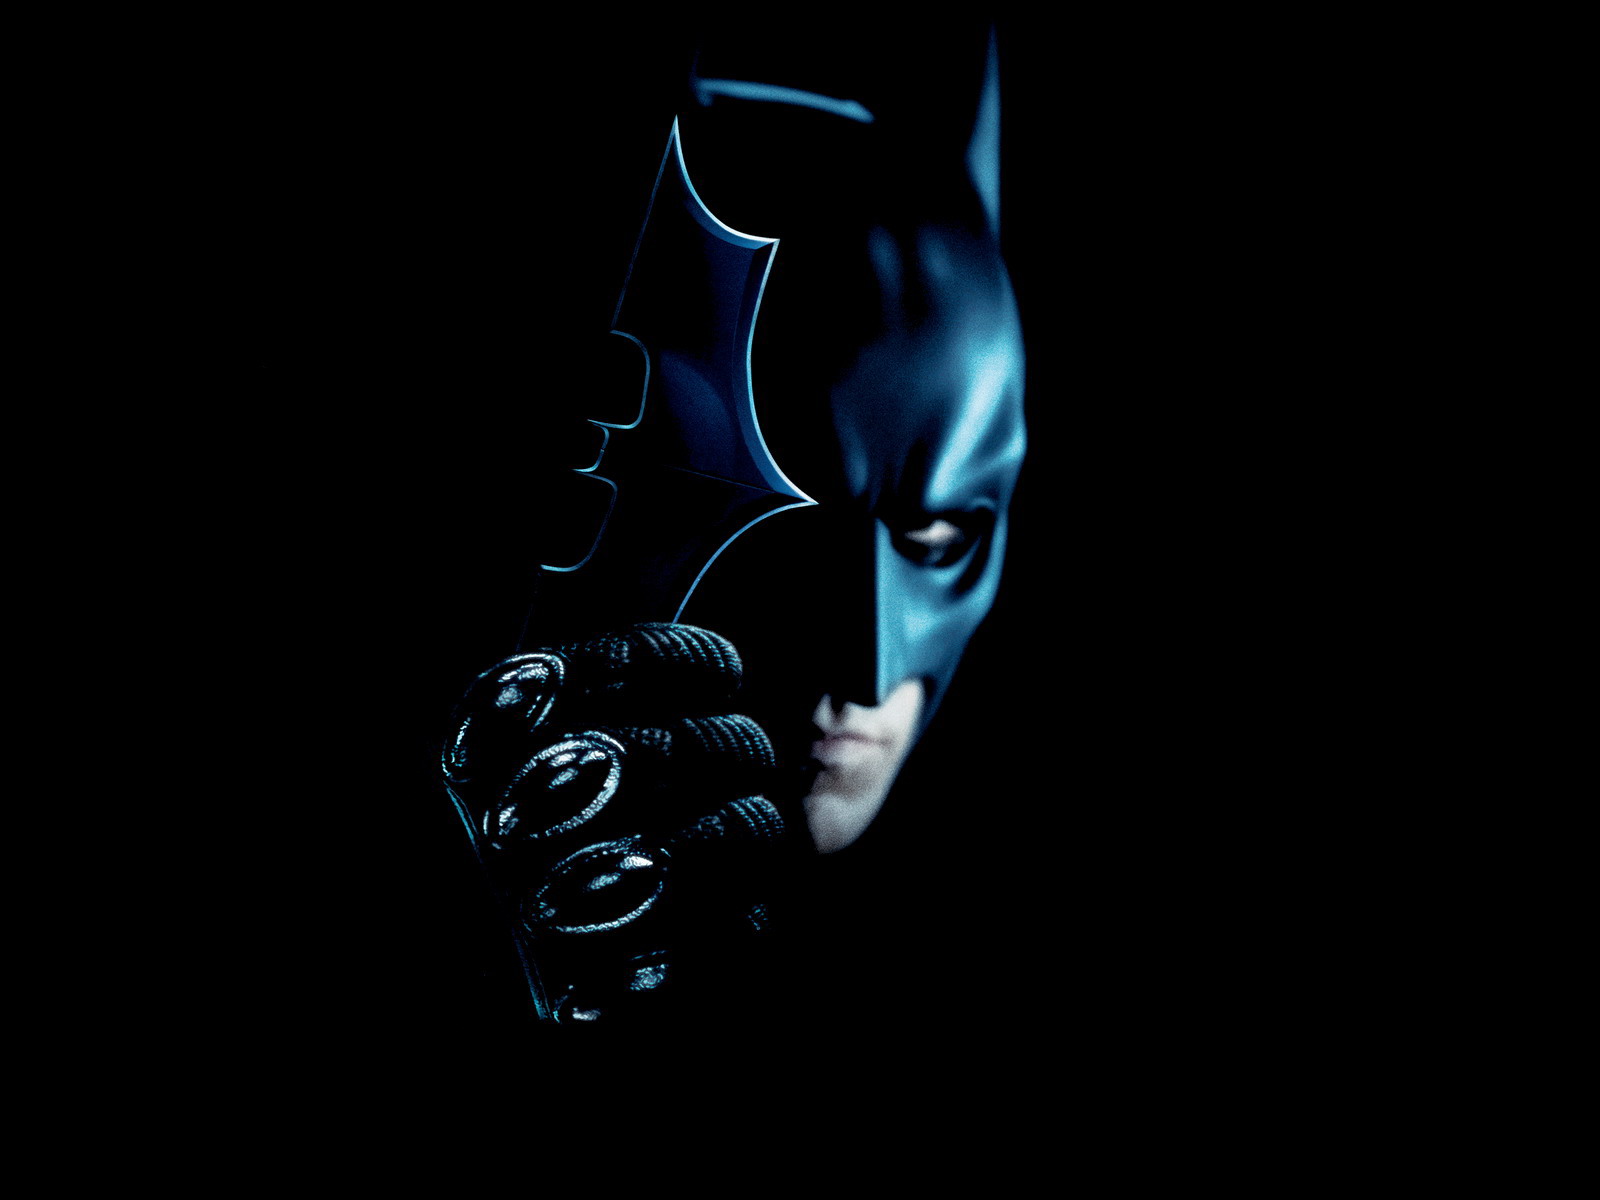 Download High quality The Dark Knight wallpaper / Movies / 1600x1200